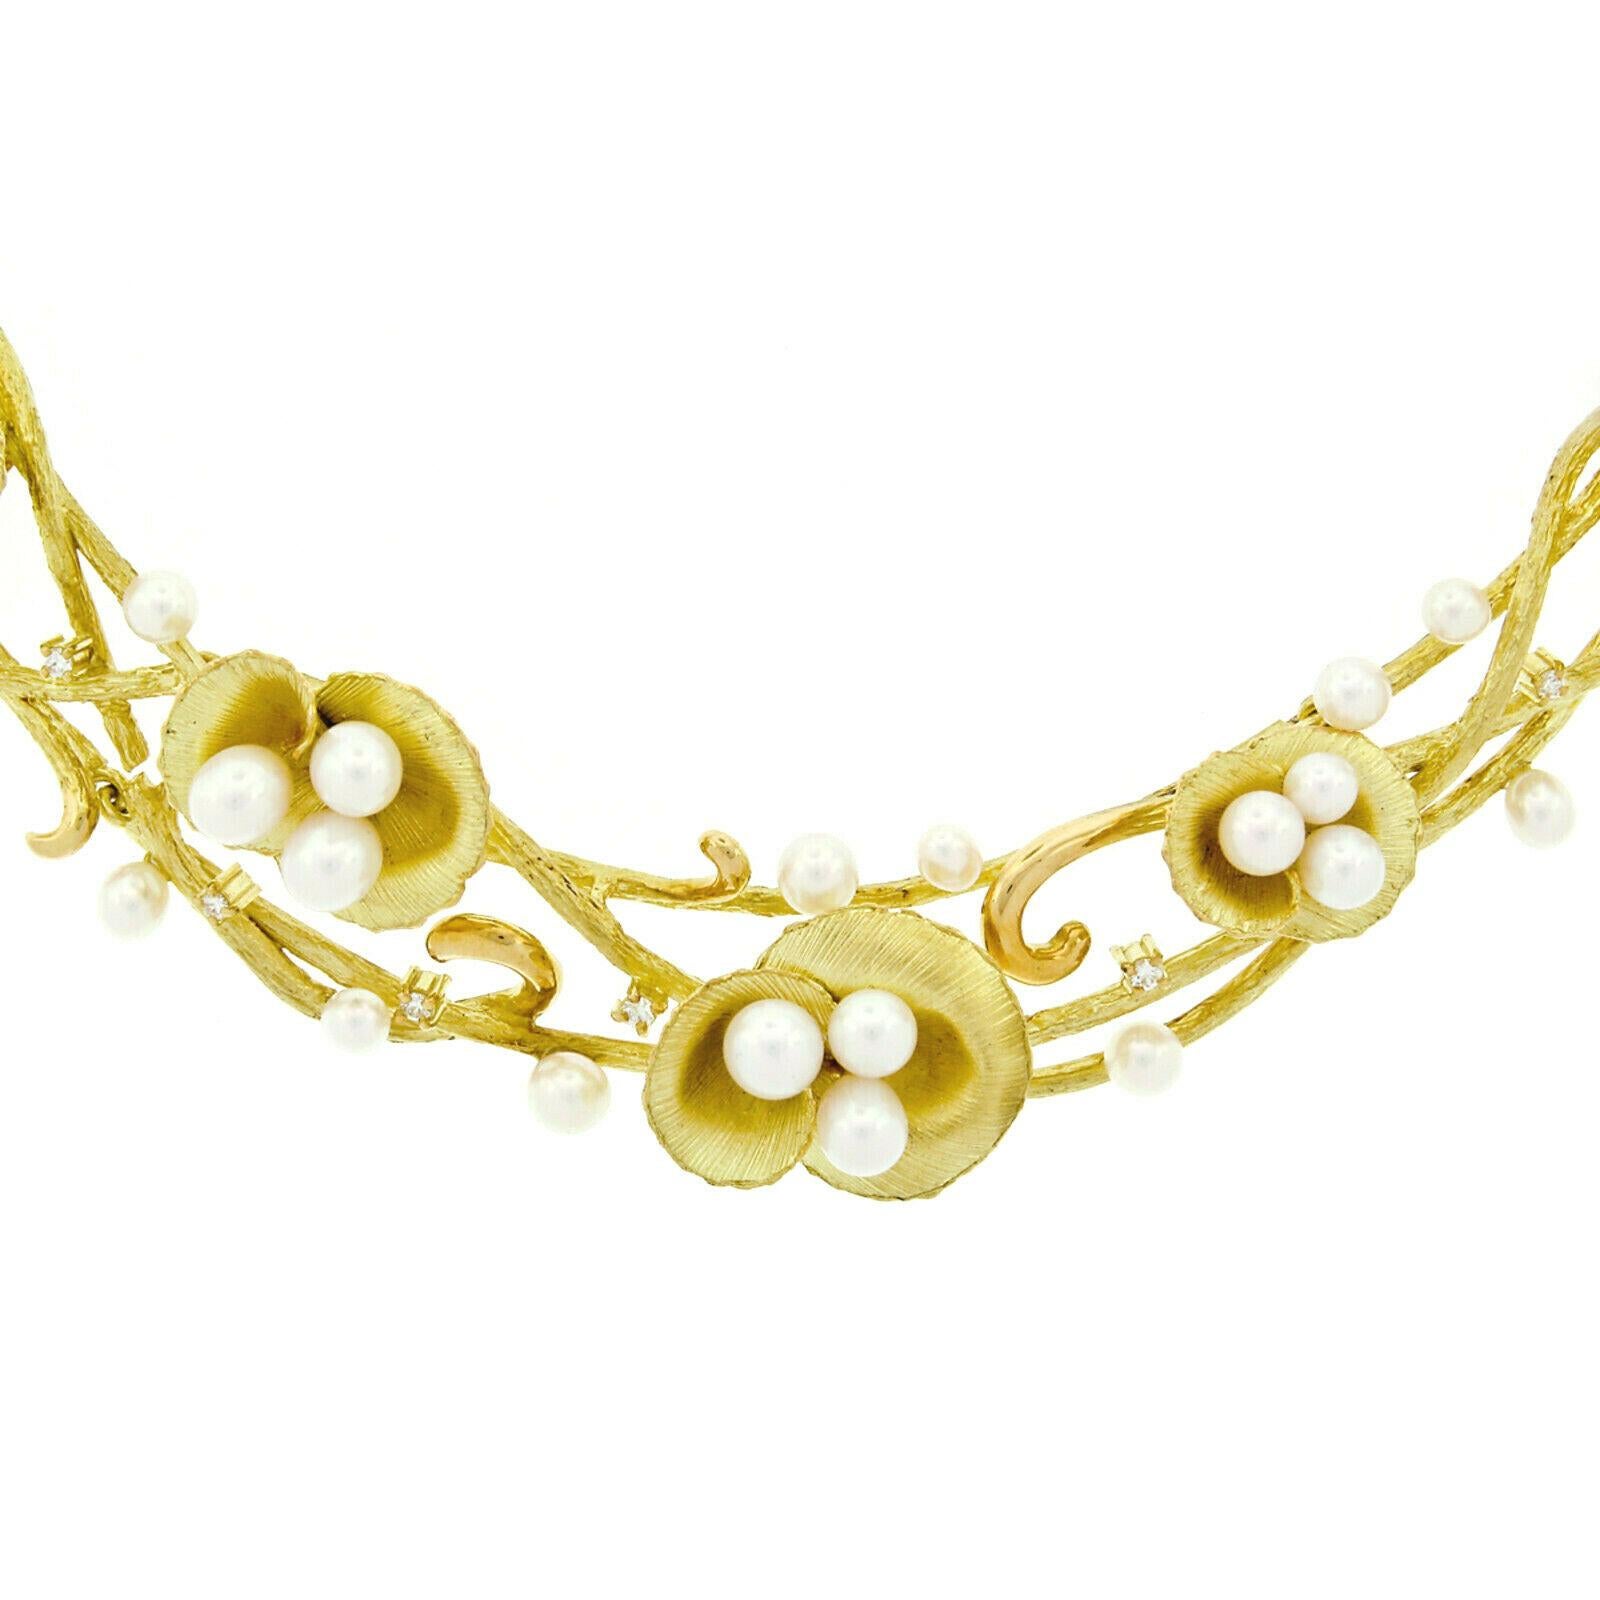 Oval Cut Vintage Solid 18k Gold Pearl Textured Flower & Diamond Statement Necklace